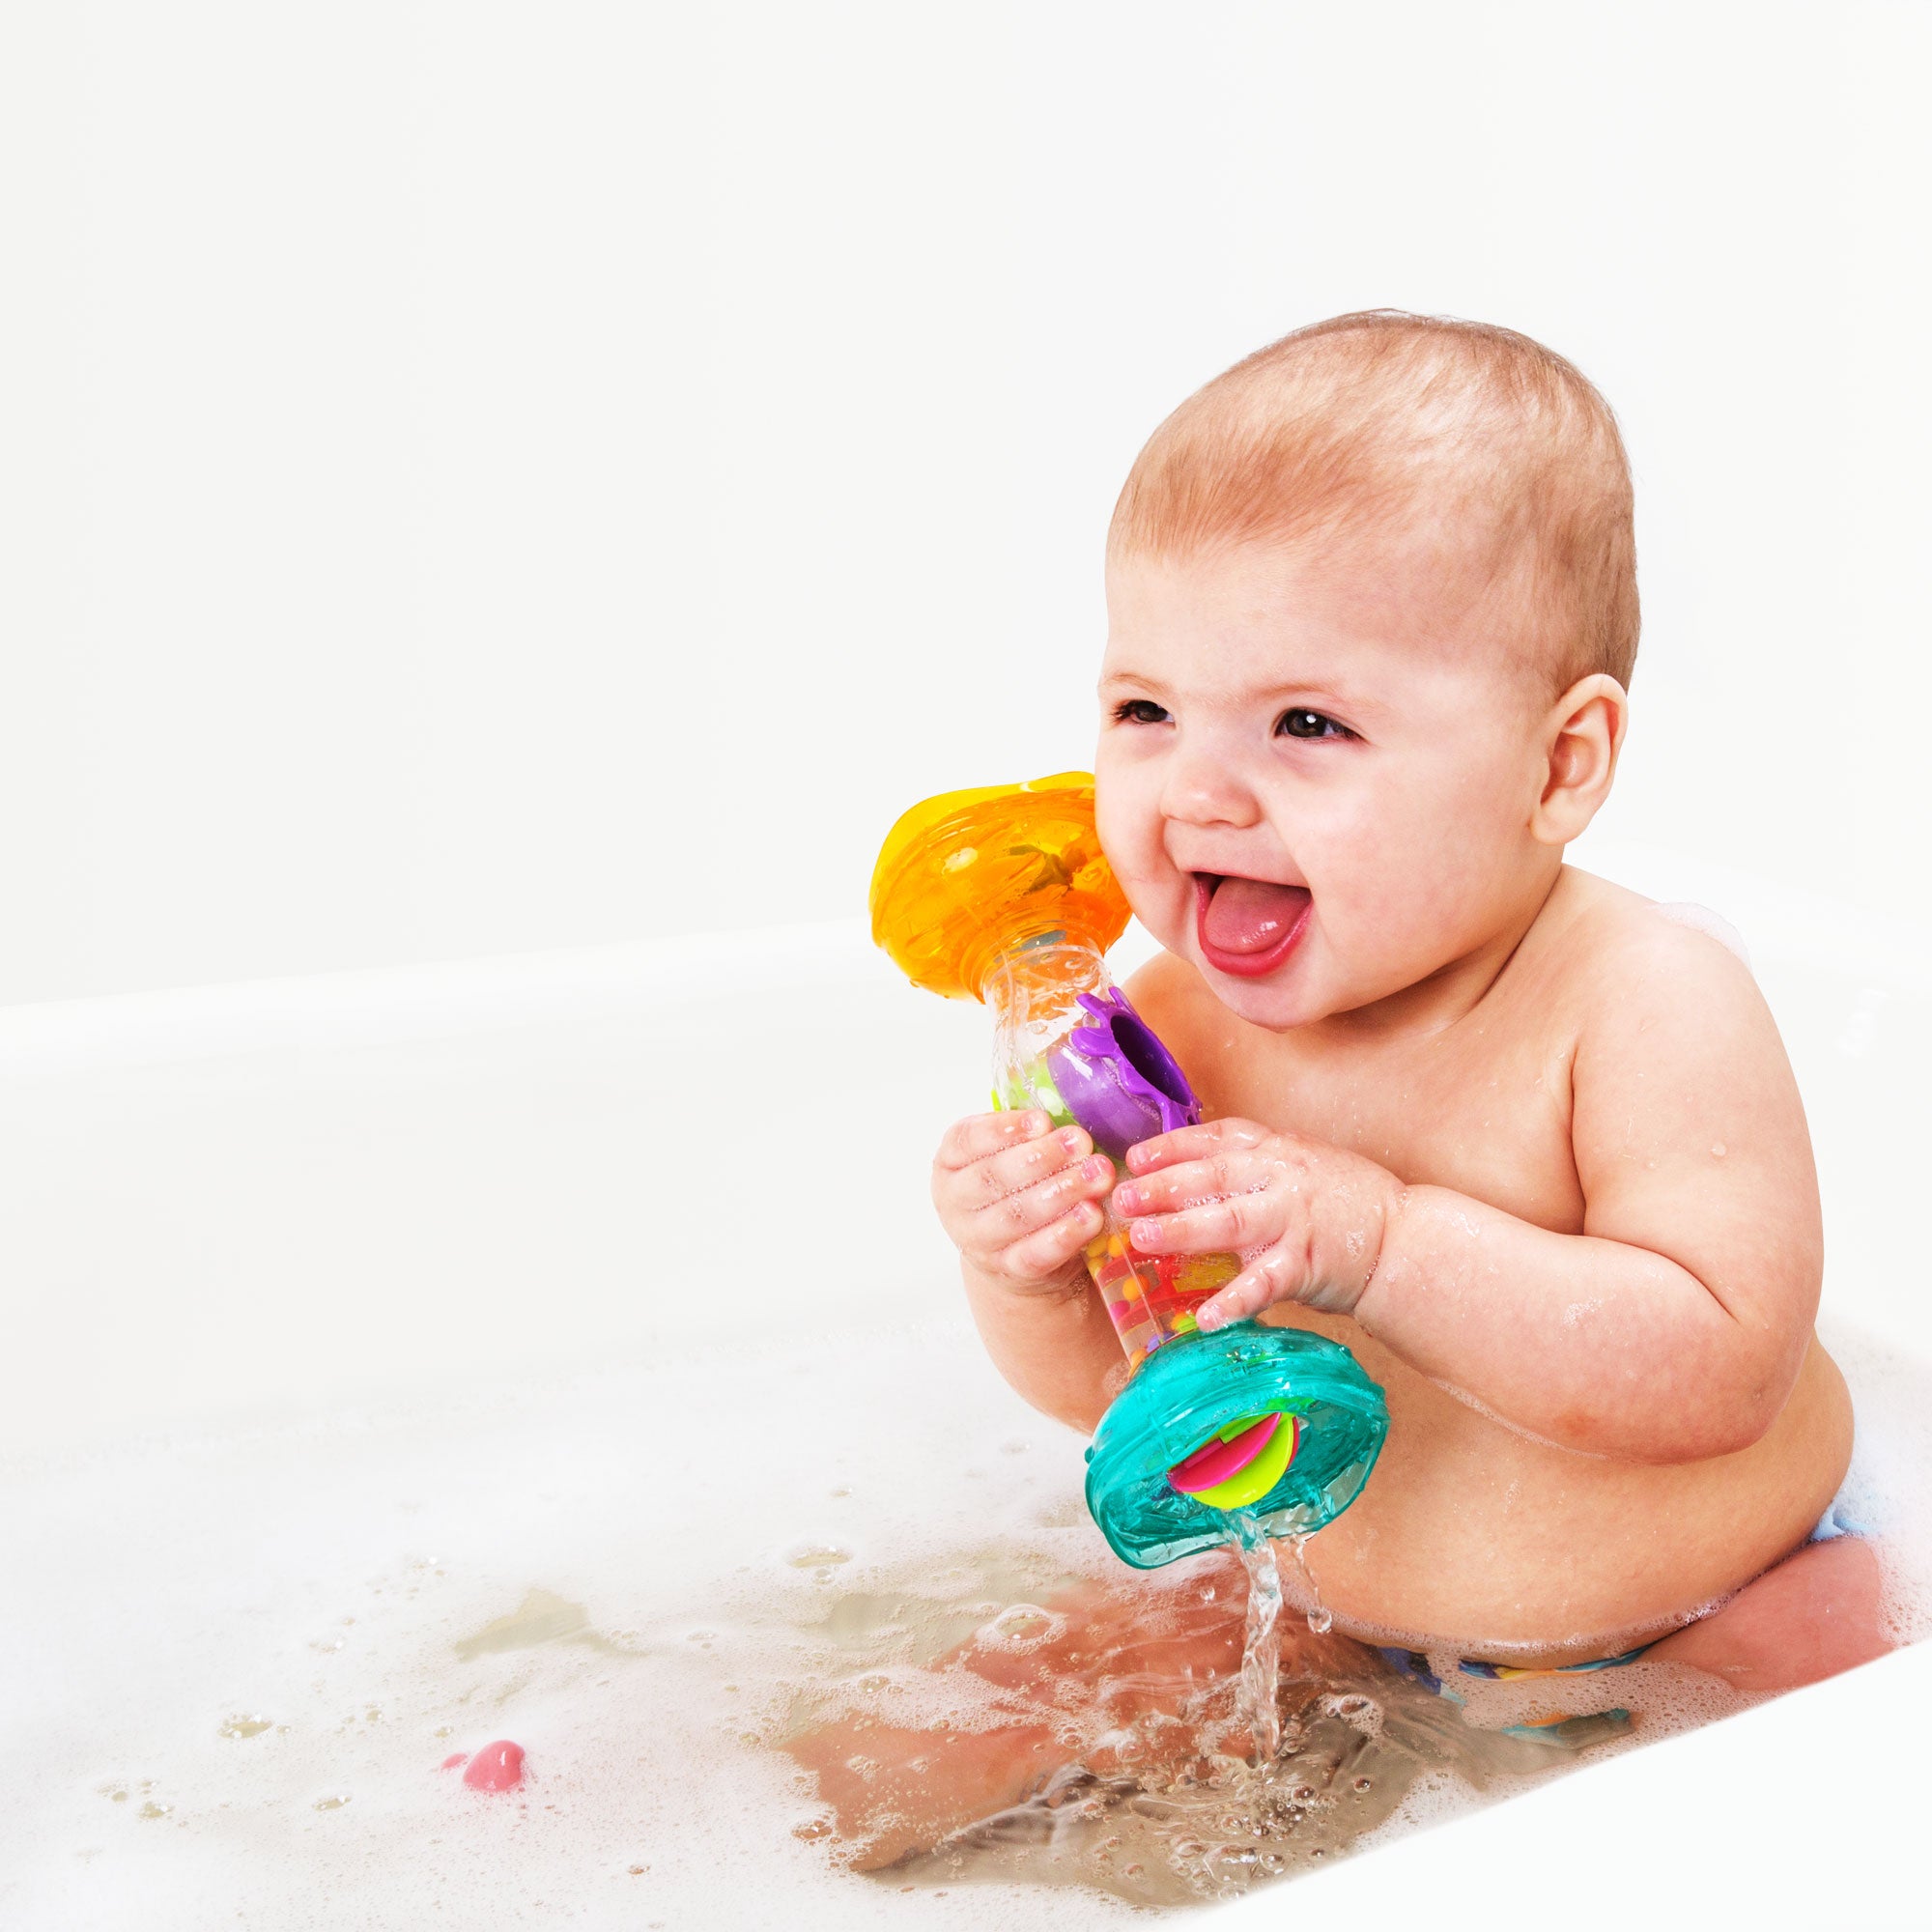 A baby boy playing Playgro rainmaker toy in the bath tub